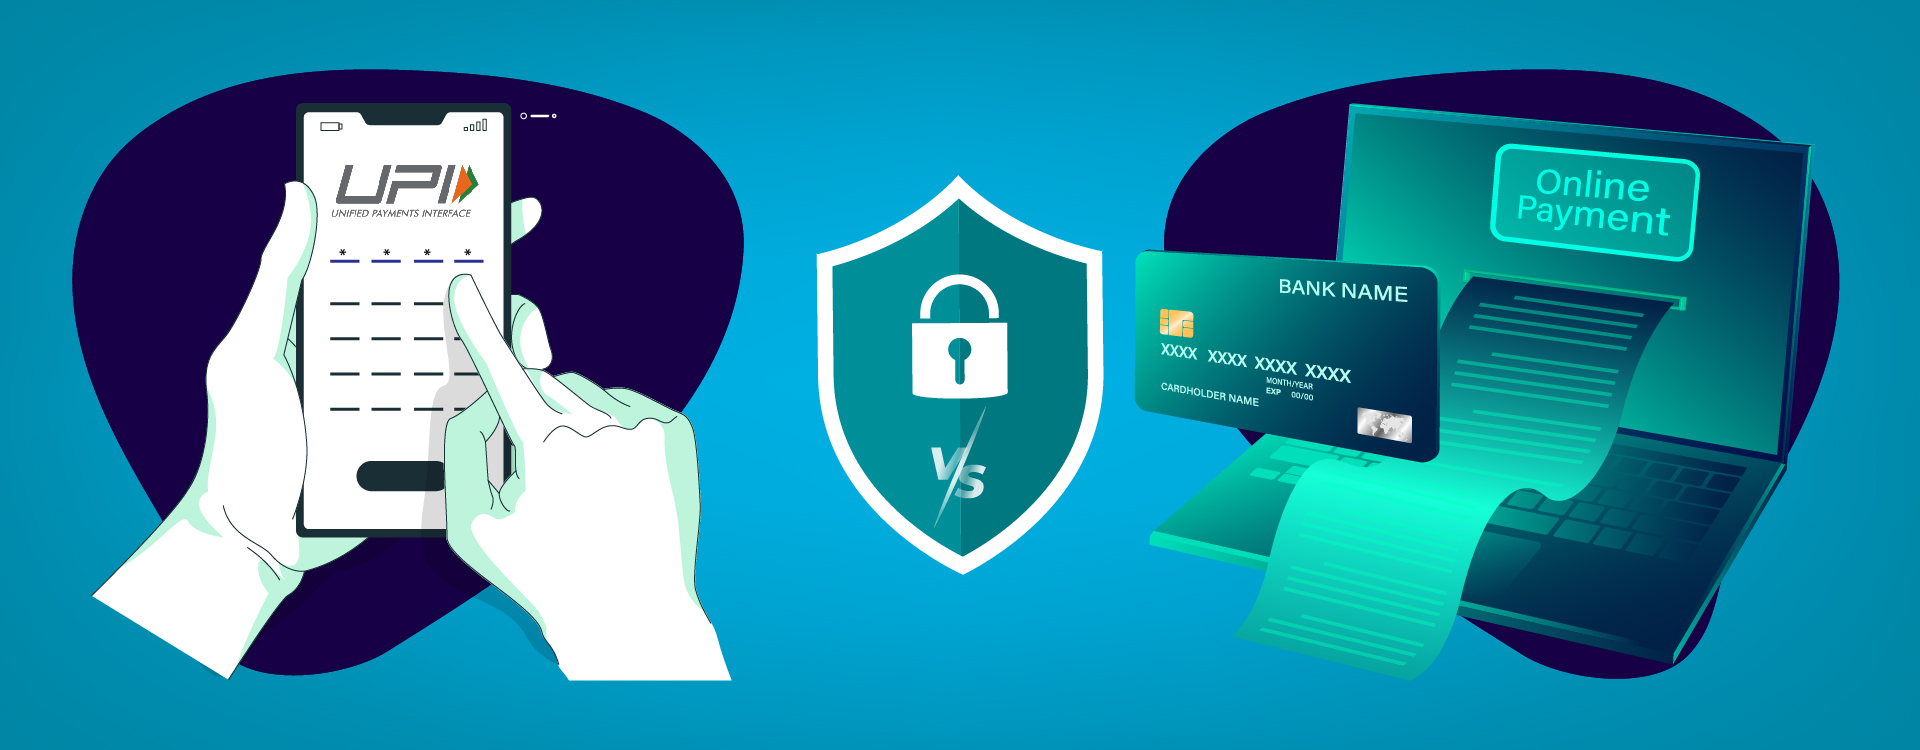 Payment gateway is safer than UPI payments since it follows a number of security compliances.